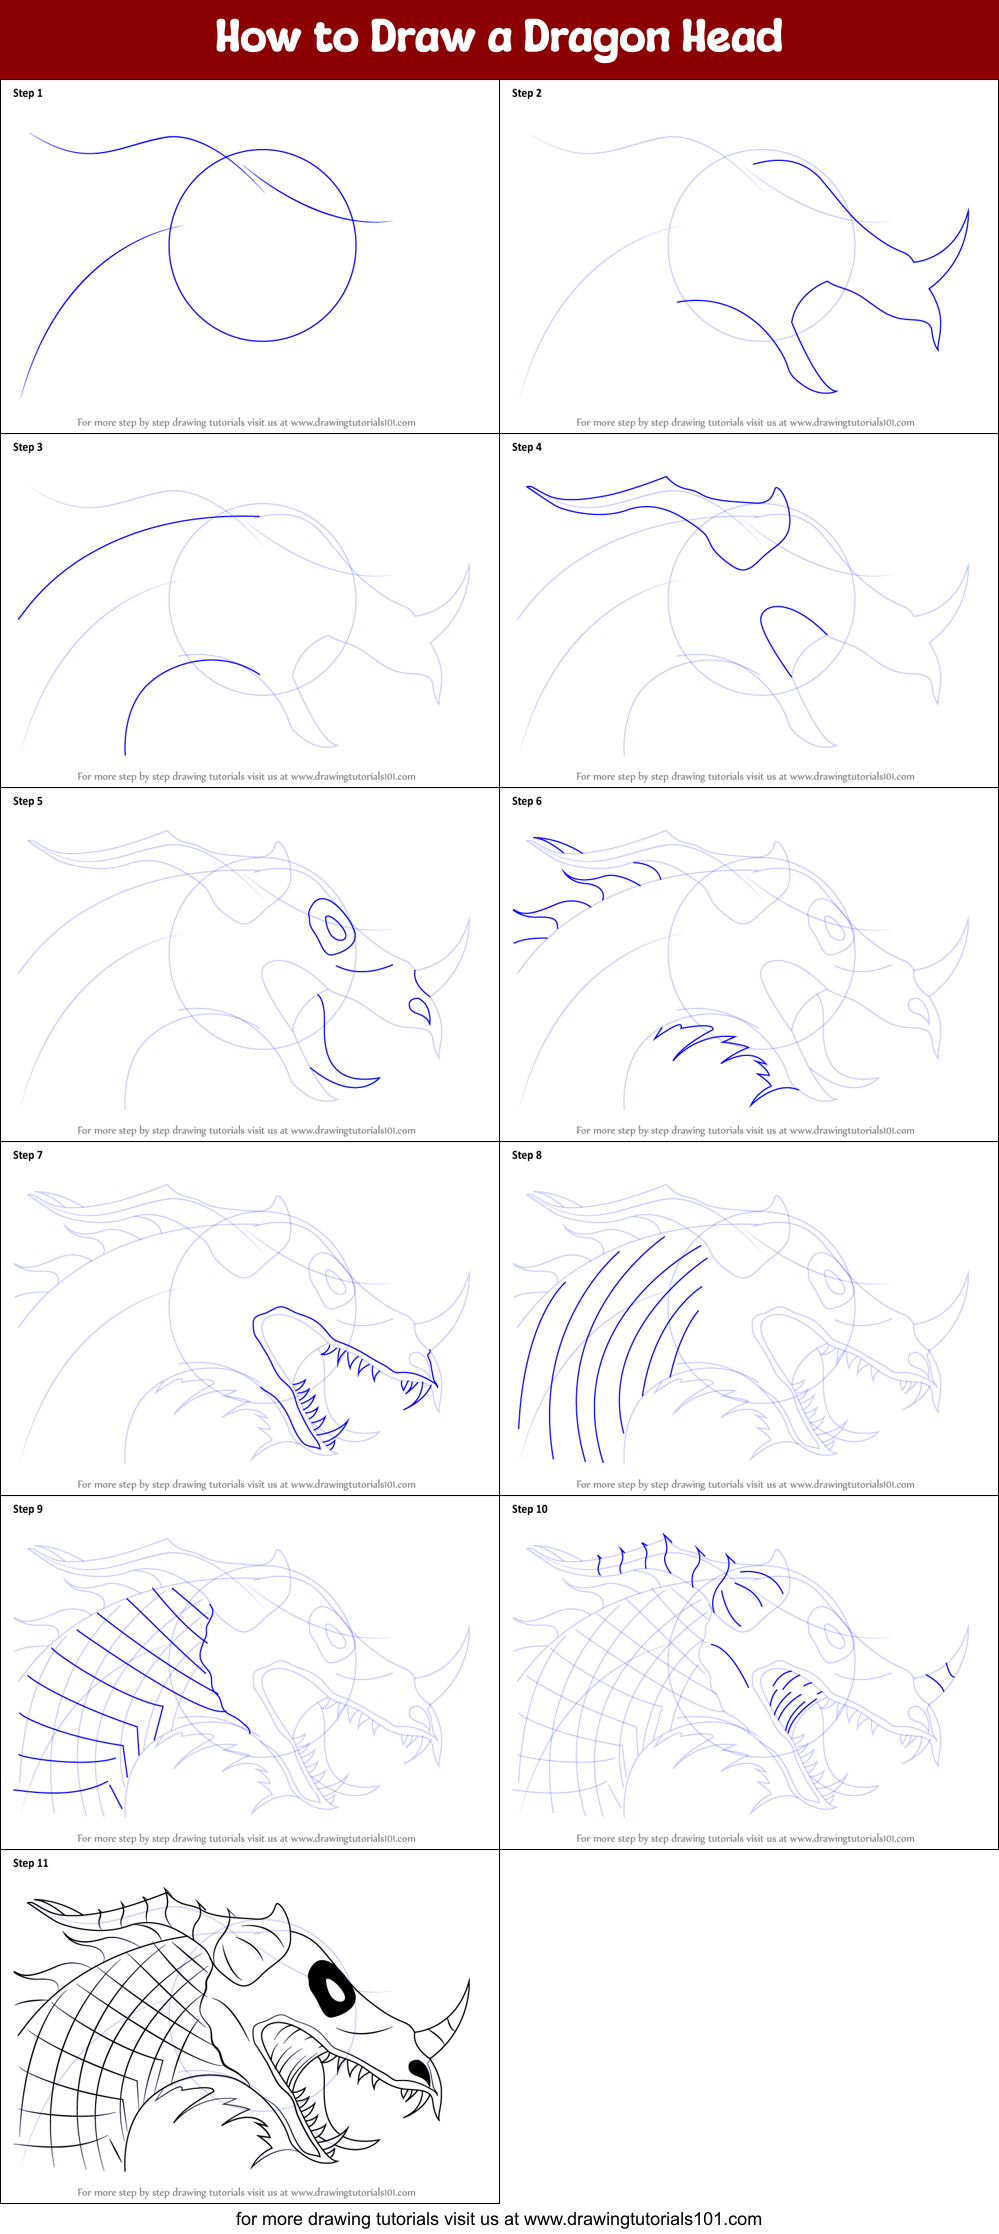 How to Draw a Dragon Head printable step by step drawing sheet